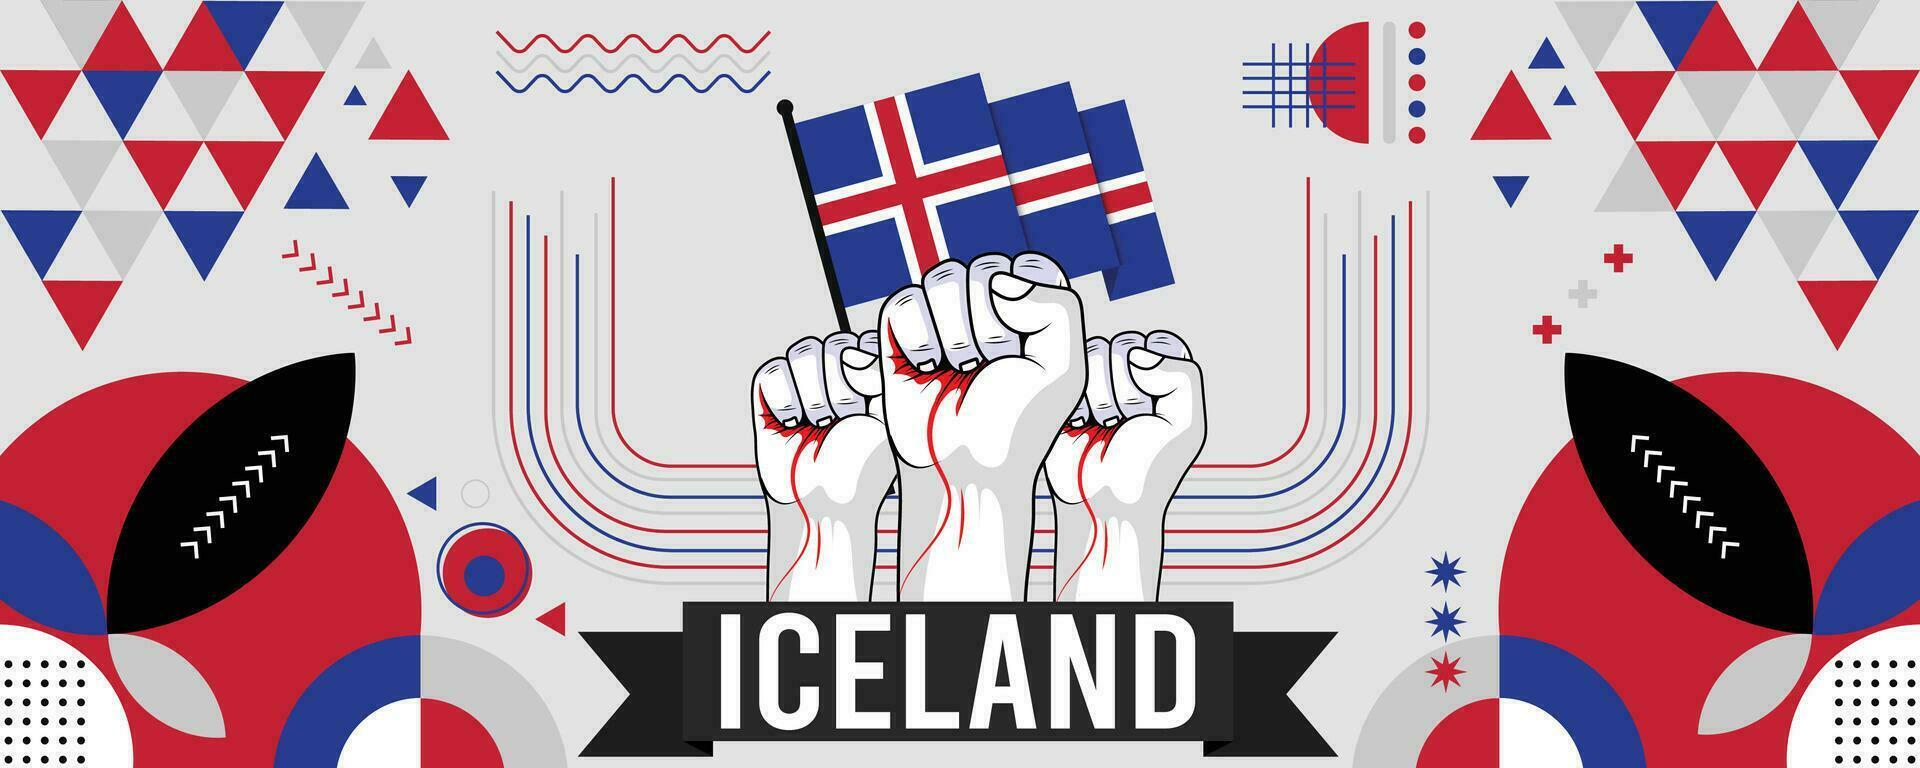 Iceland national or independence day banner for country celebration. Flag of Icelanders with raised fists. Modern retro design with typorgaphy abstract geometric icons. Vector illustration.